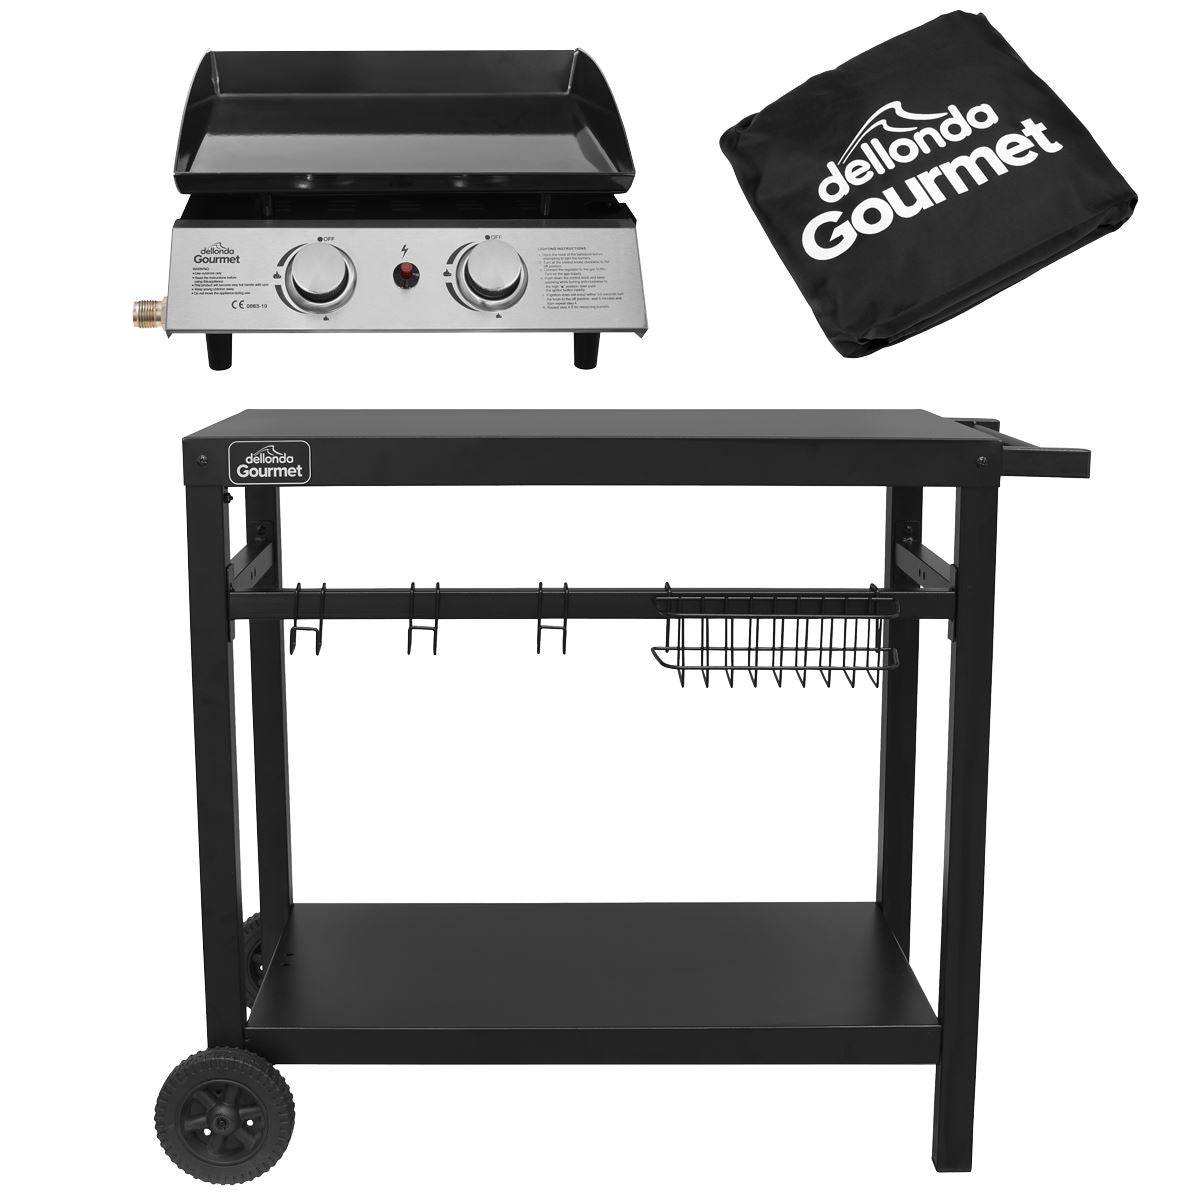 Dellonda 2 Burner Portable Gas Plancha 5kW BBQ Griddle, Stainless Steel, Supplied with Water Resistant Cover & Trolley